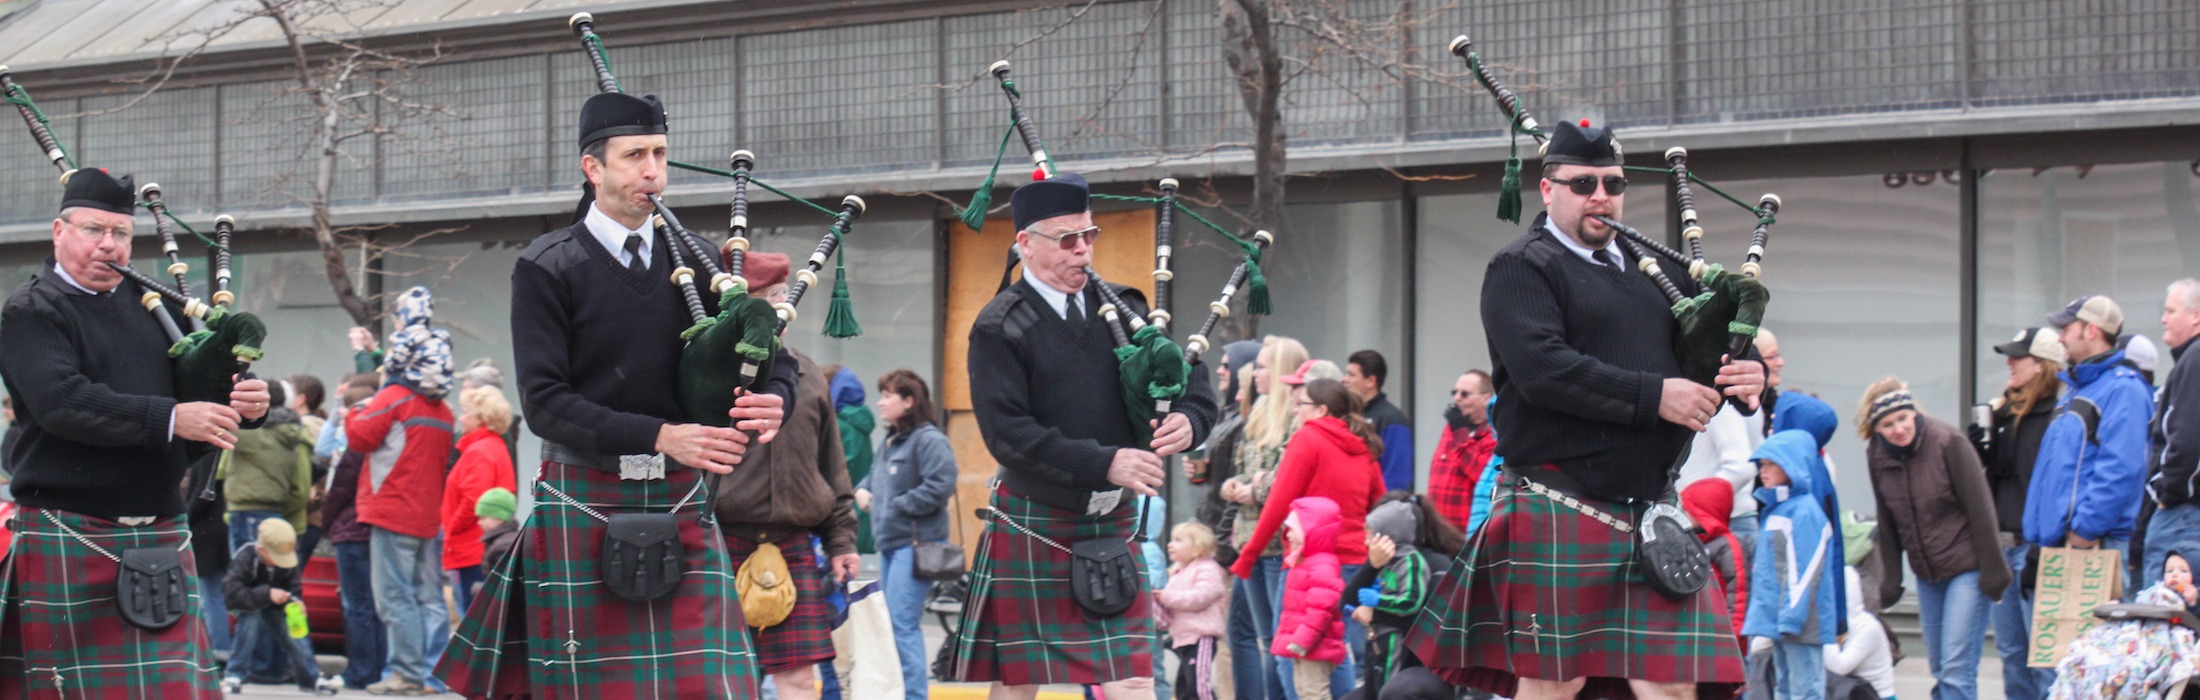 2016 St. Patrick's Day Events